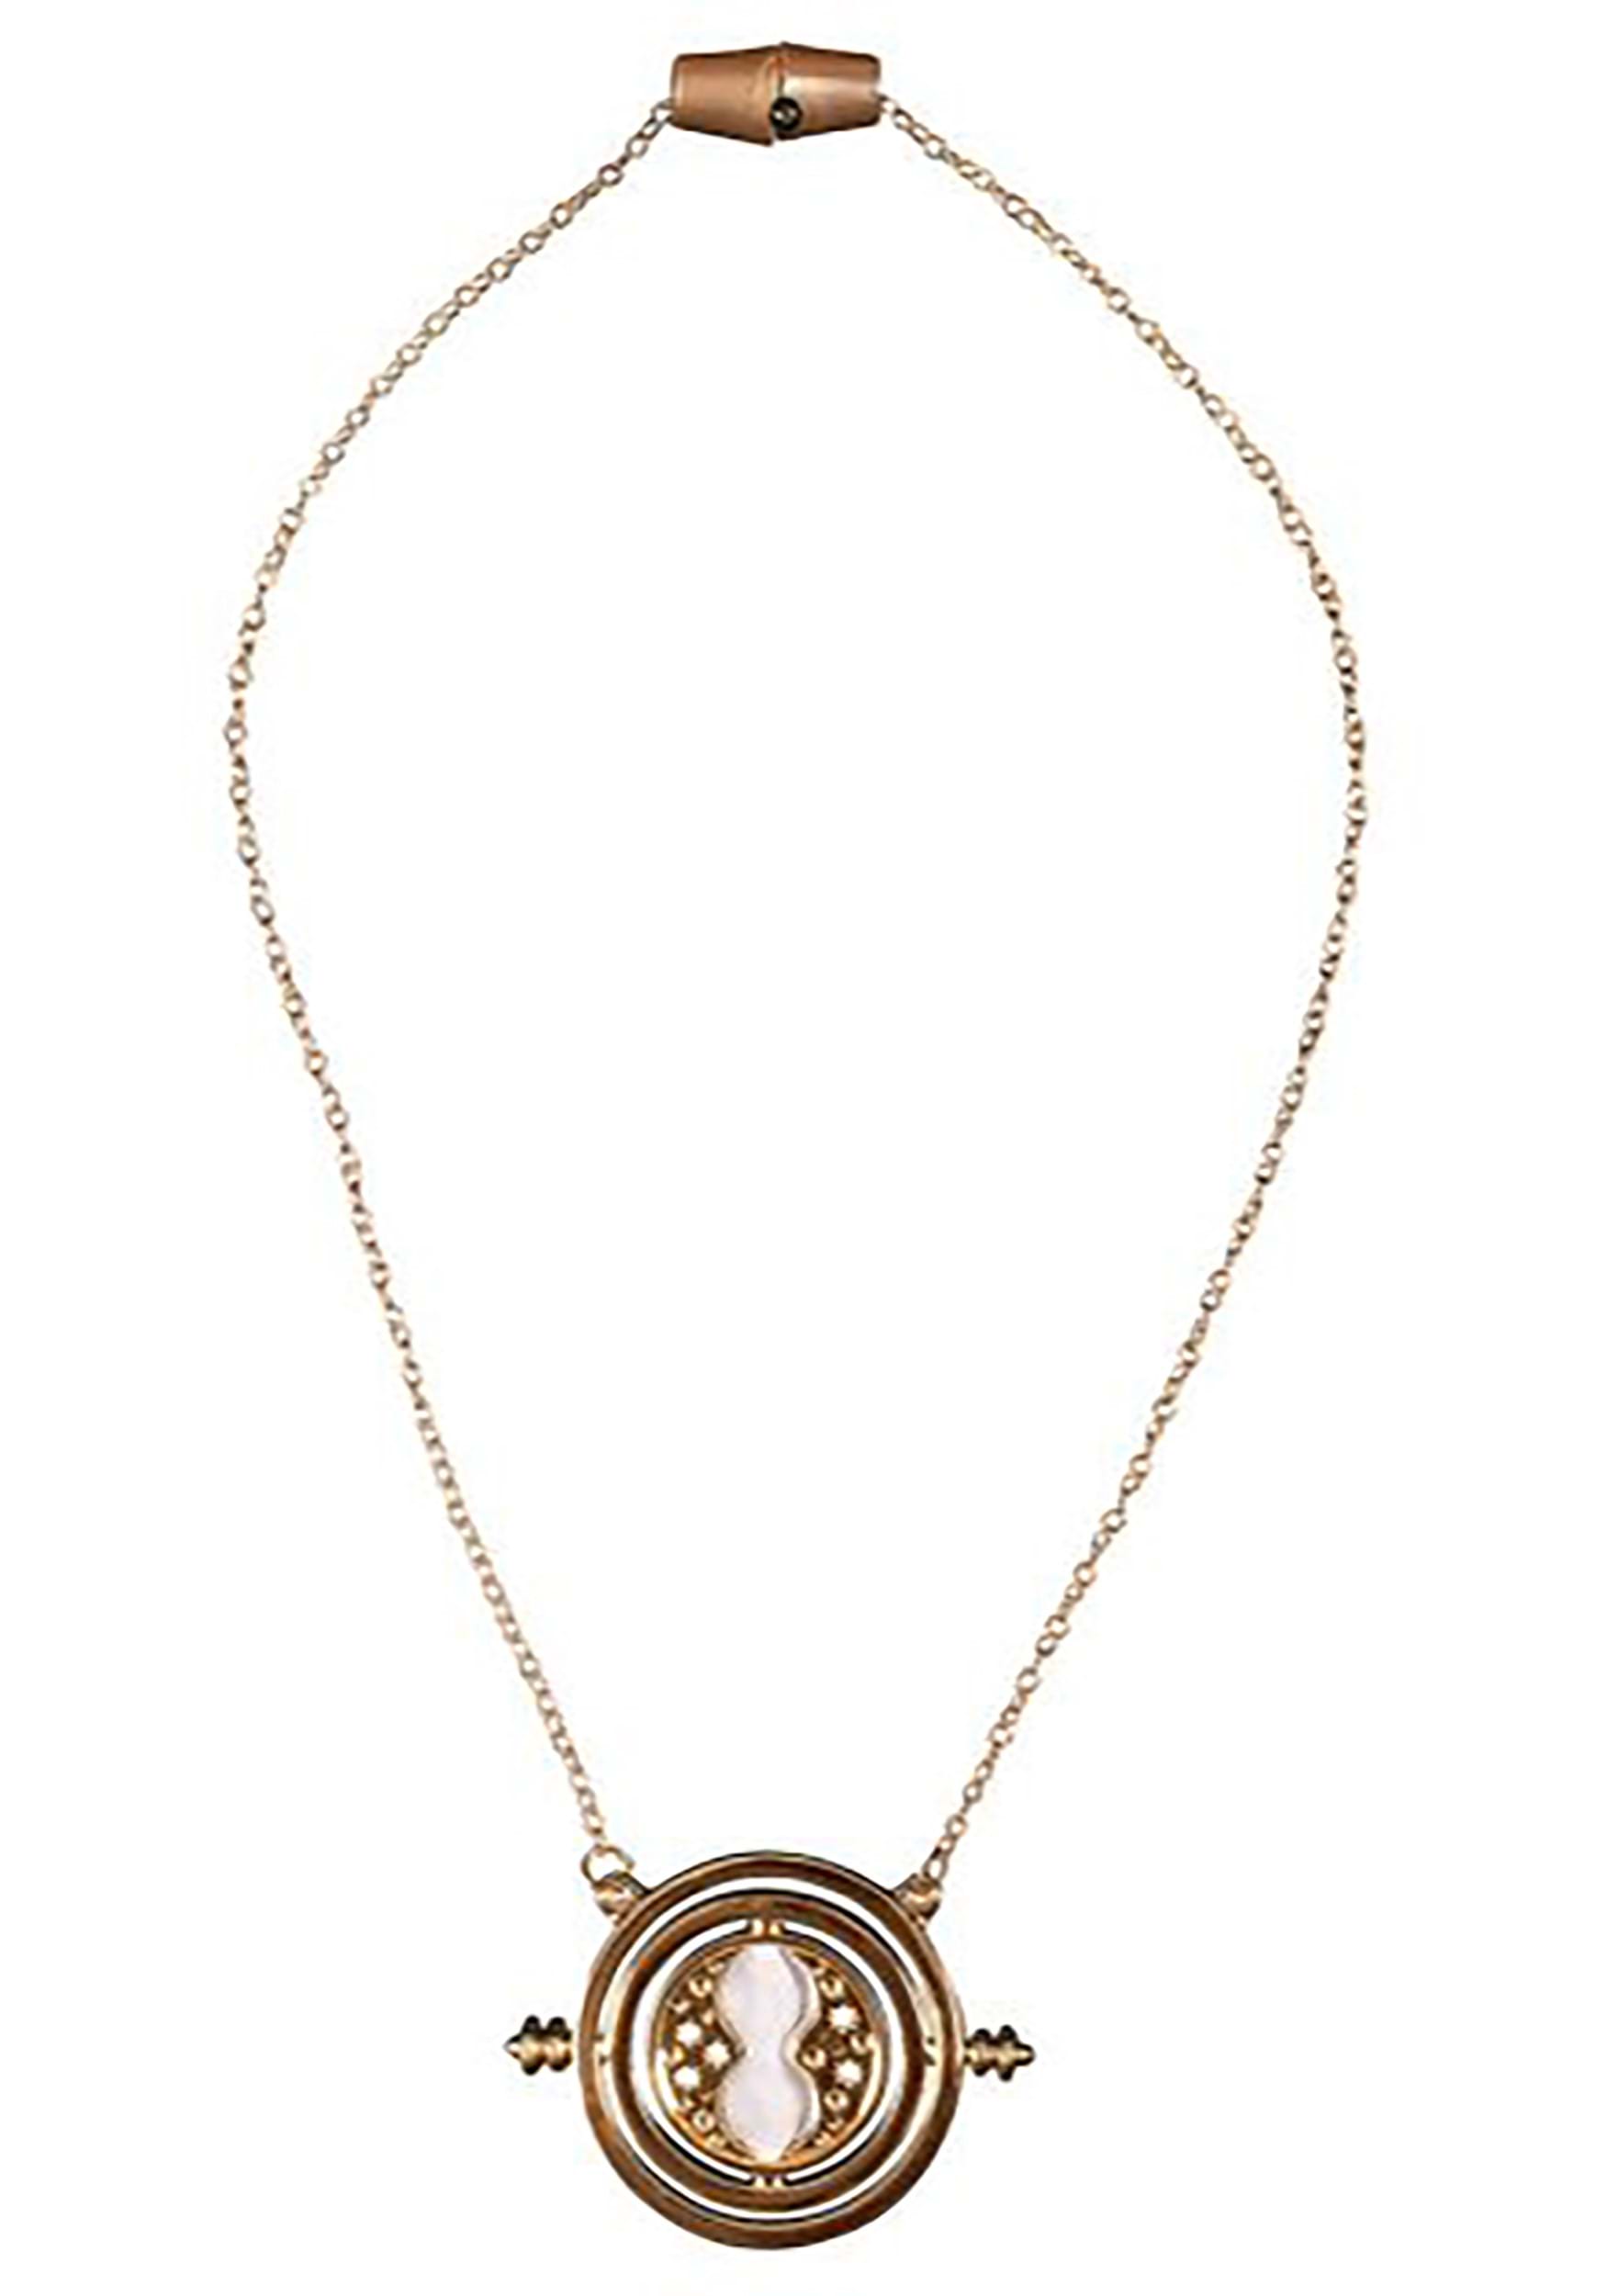 Hermione Time Turner Necklace Accessory